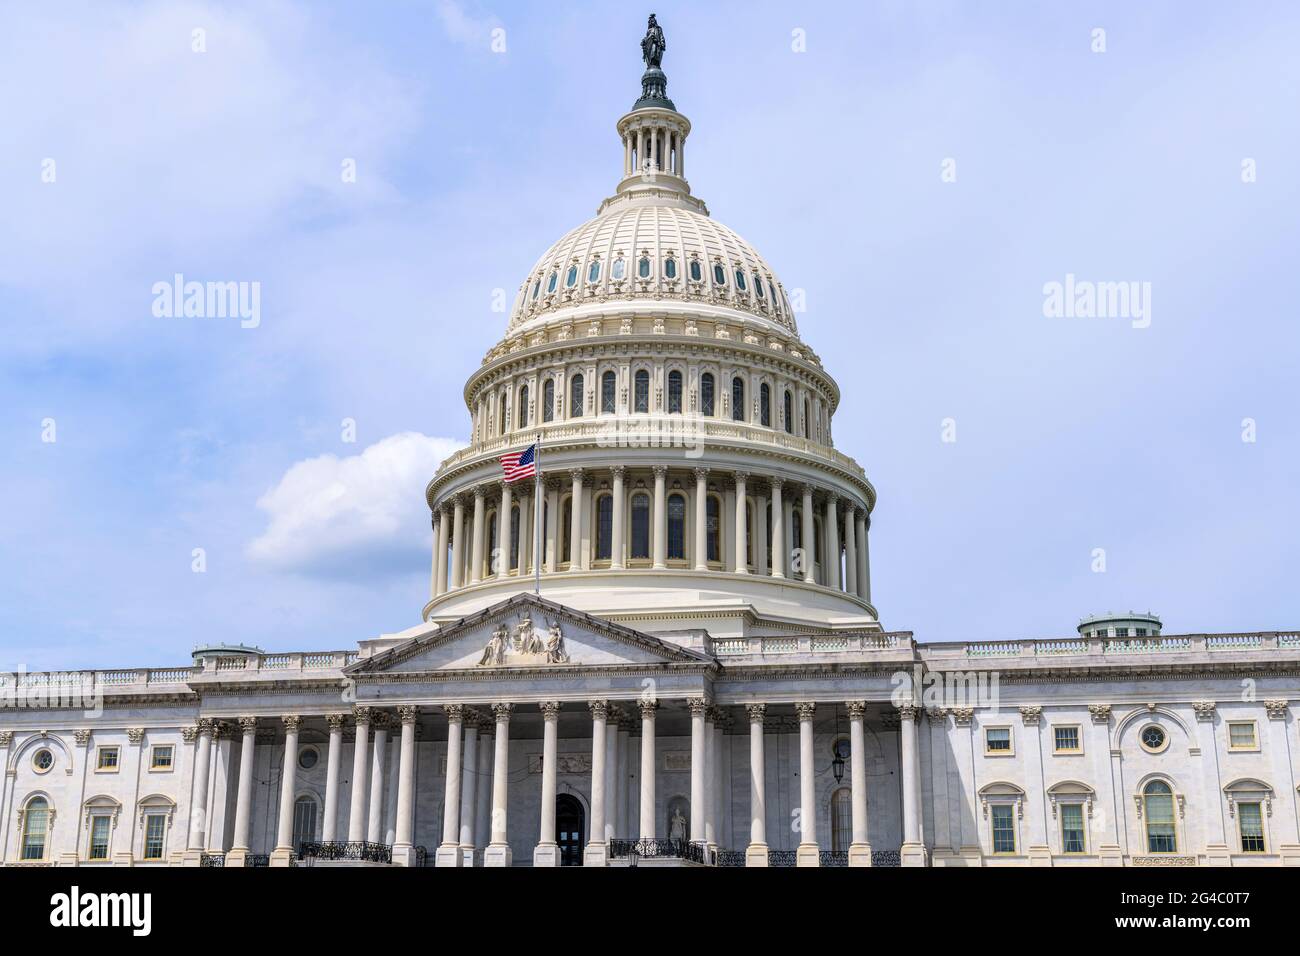 The Capitol Building - A close-up view of east front of the U.S. Capitol Building on a bright sunny day, Washington, D.C., USA. Stock Photo